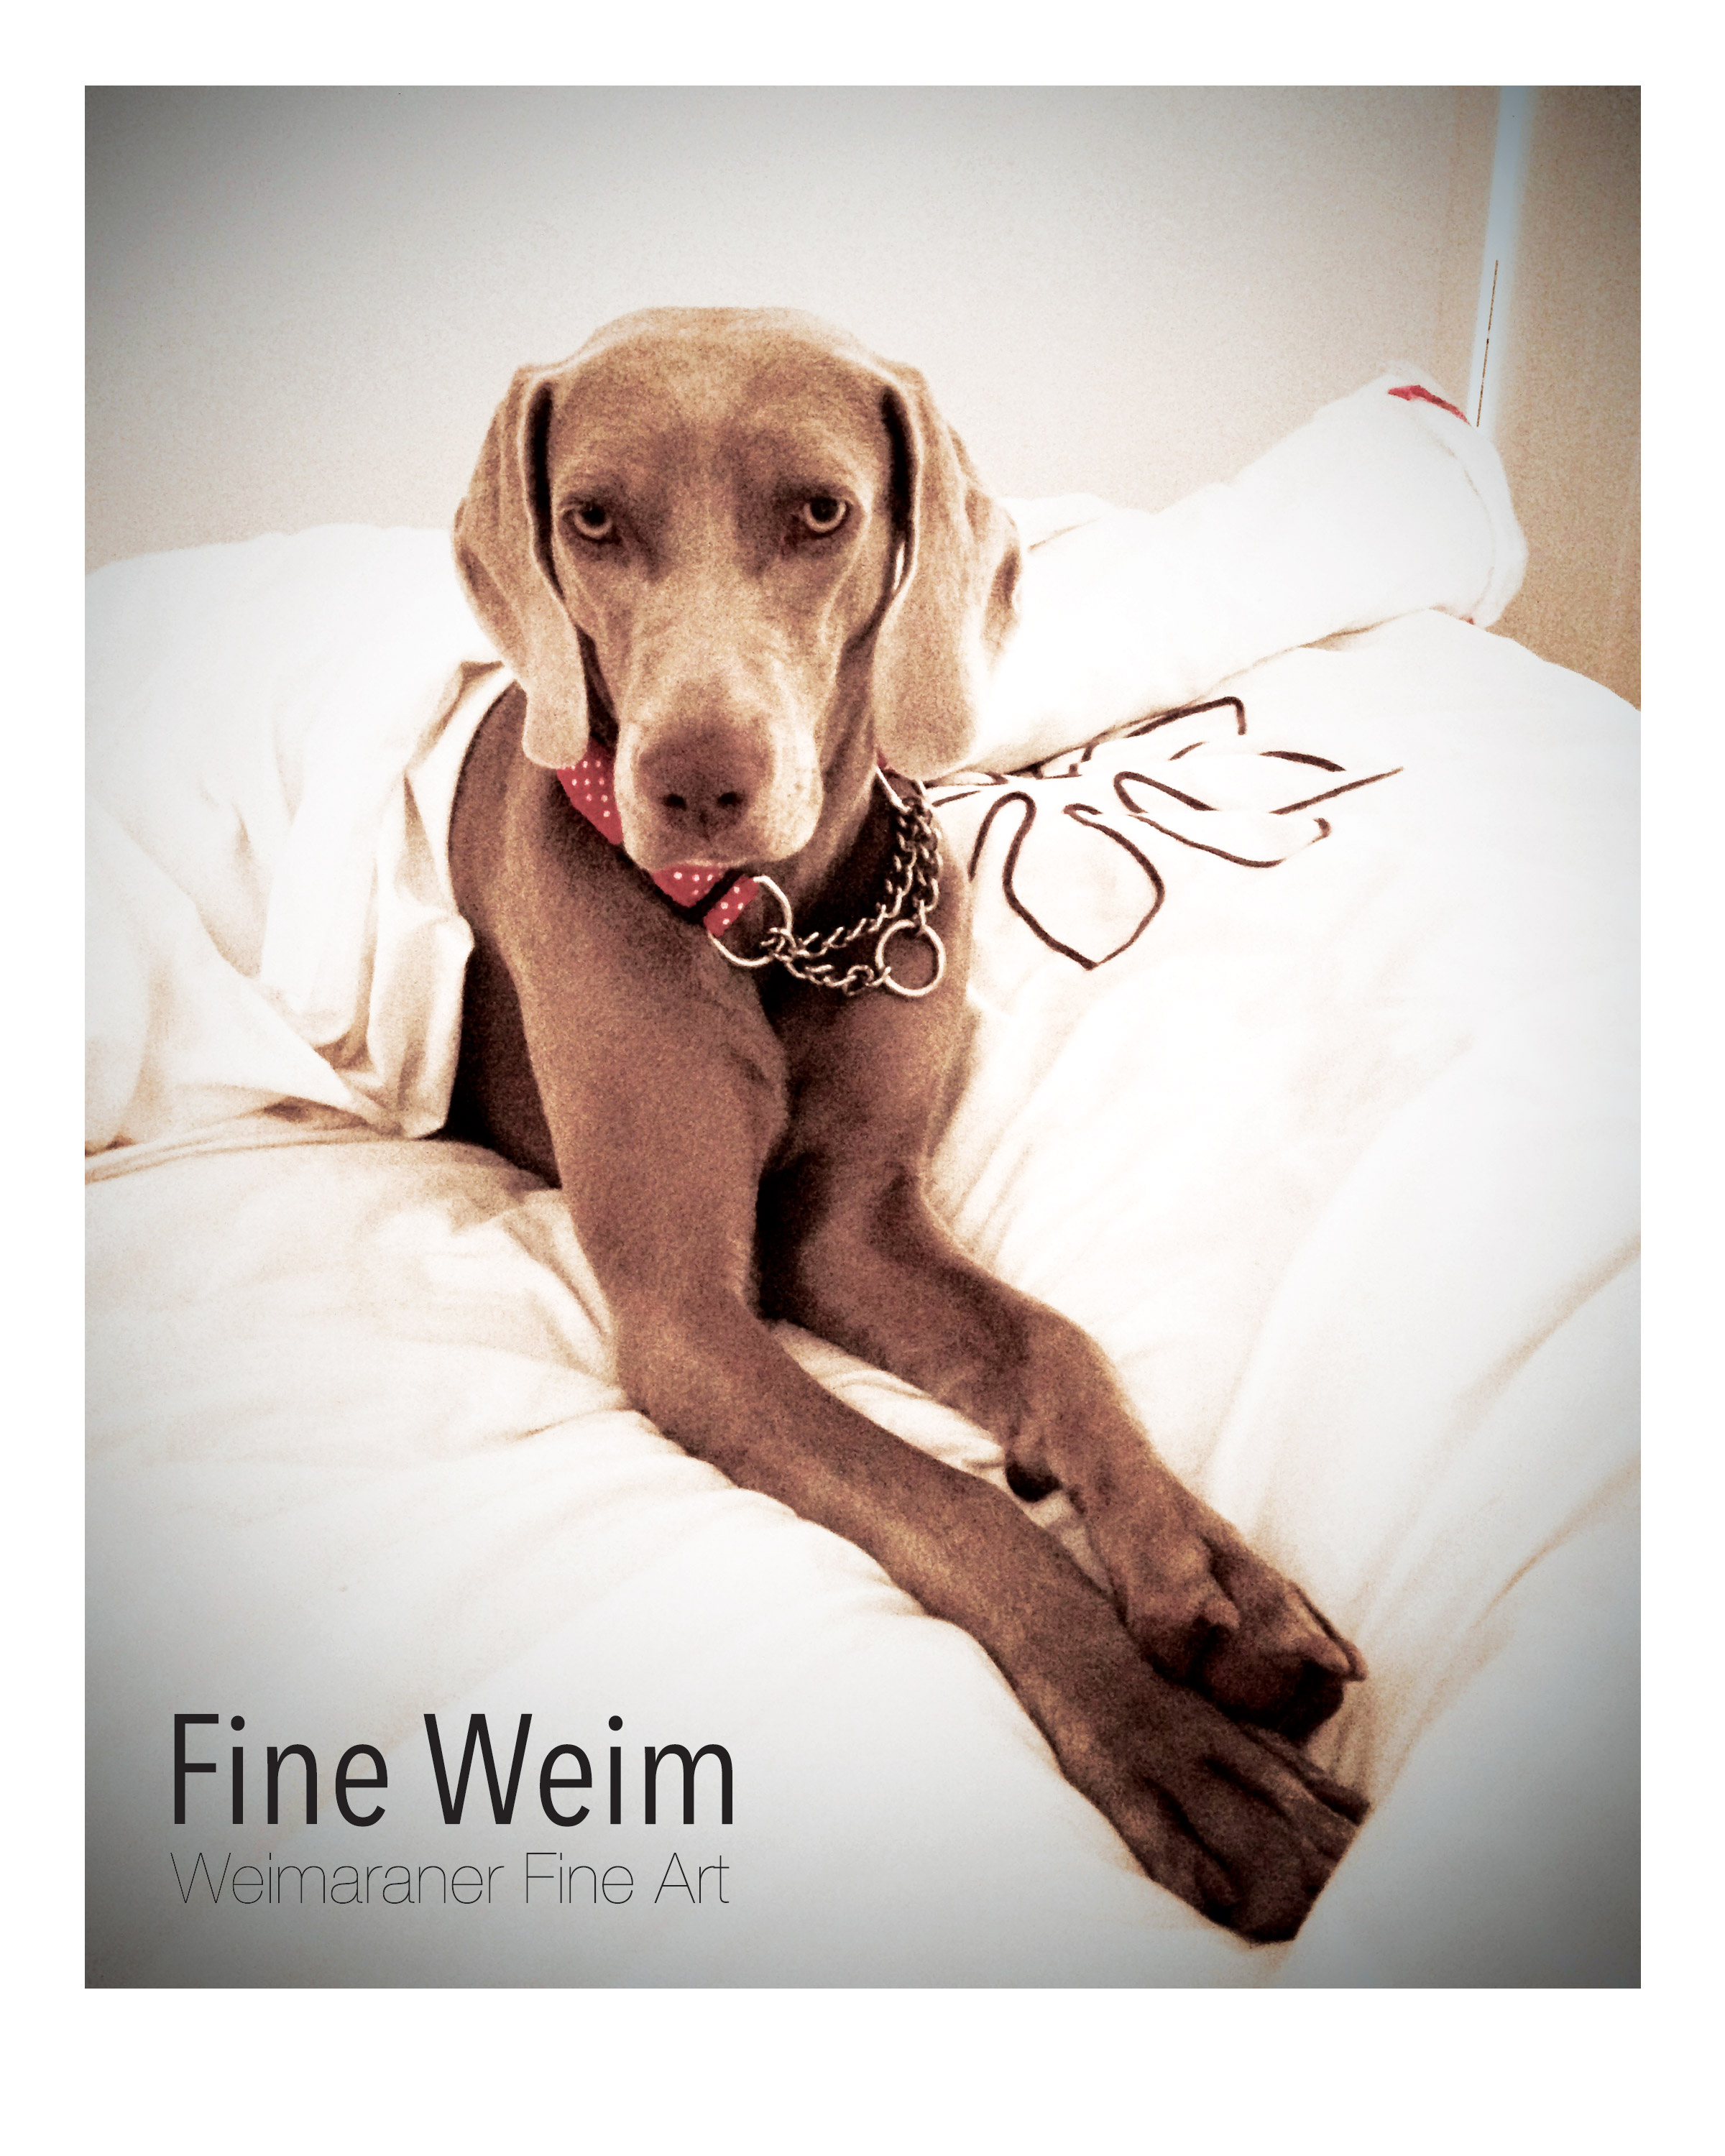 Some Weim time - Signed, Limited Edition Print